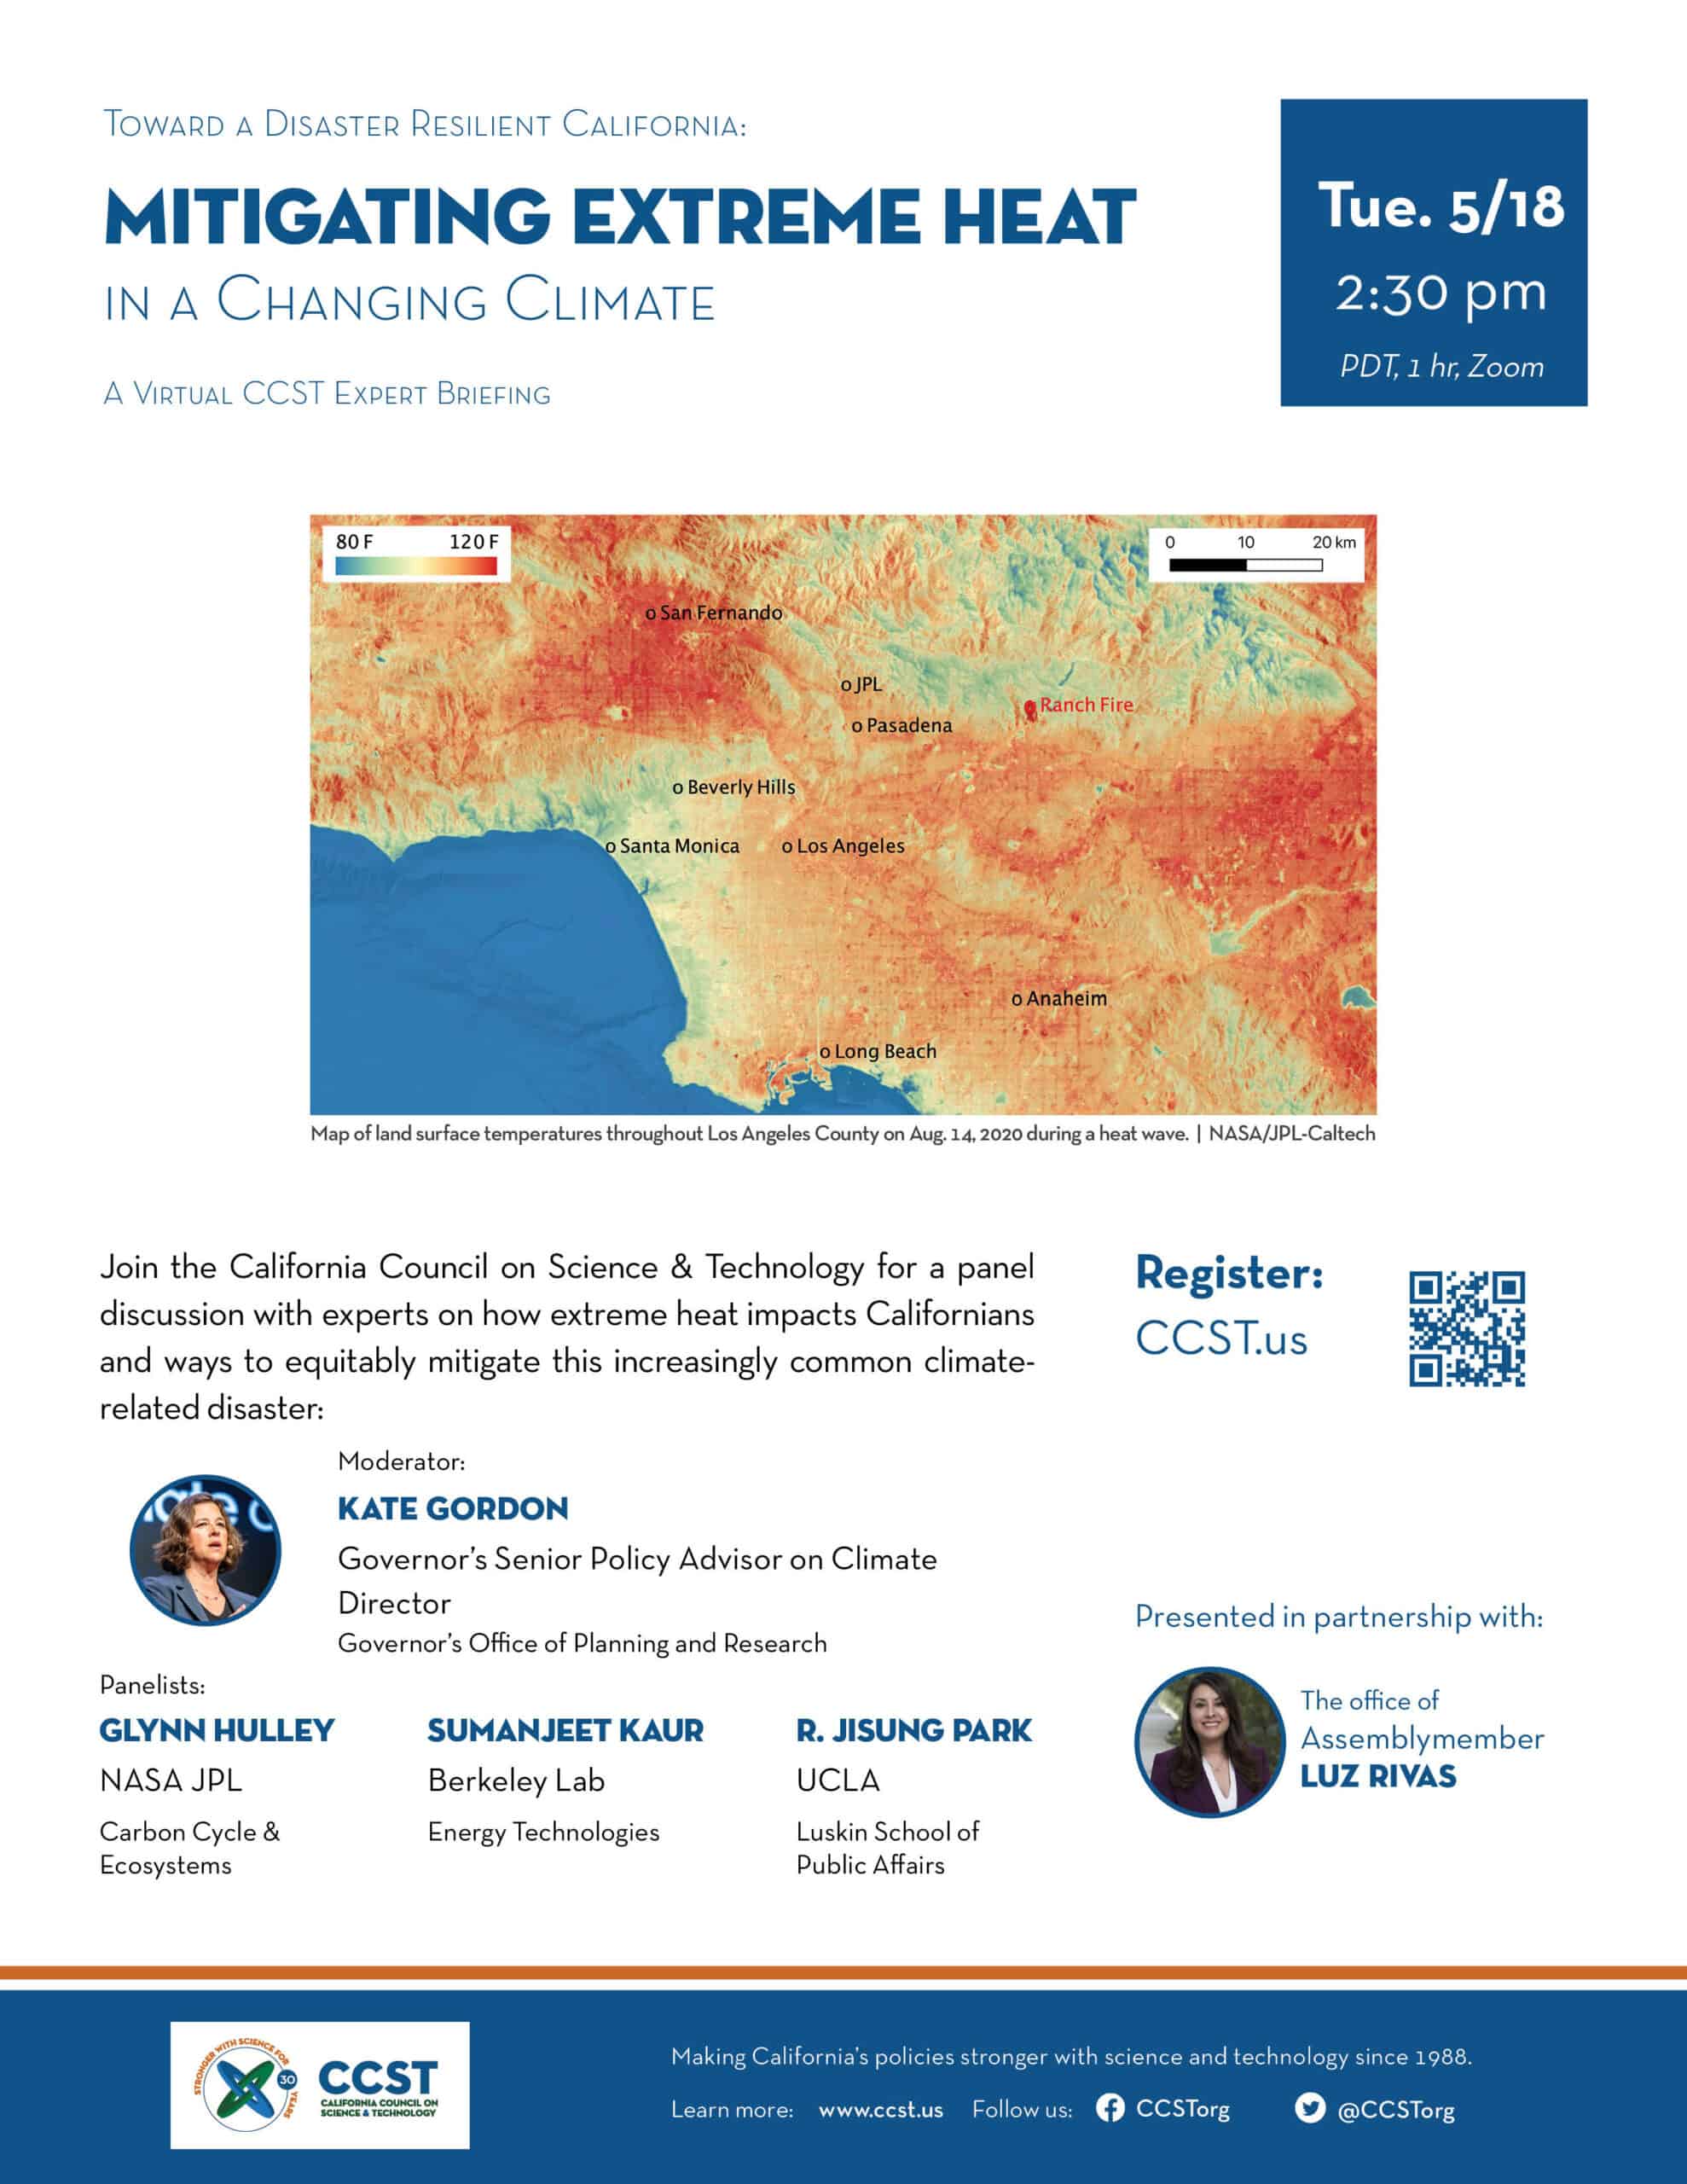 Flyer with title and panelists for the briefing and a heat map of southern California image.